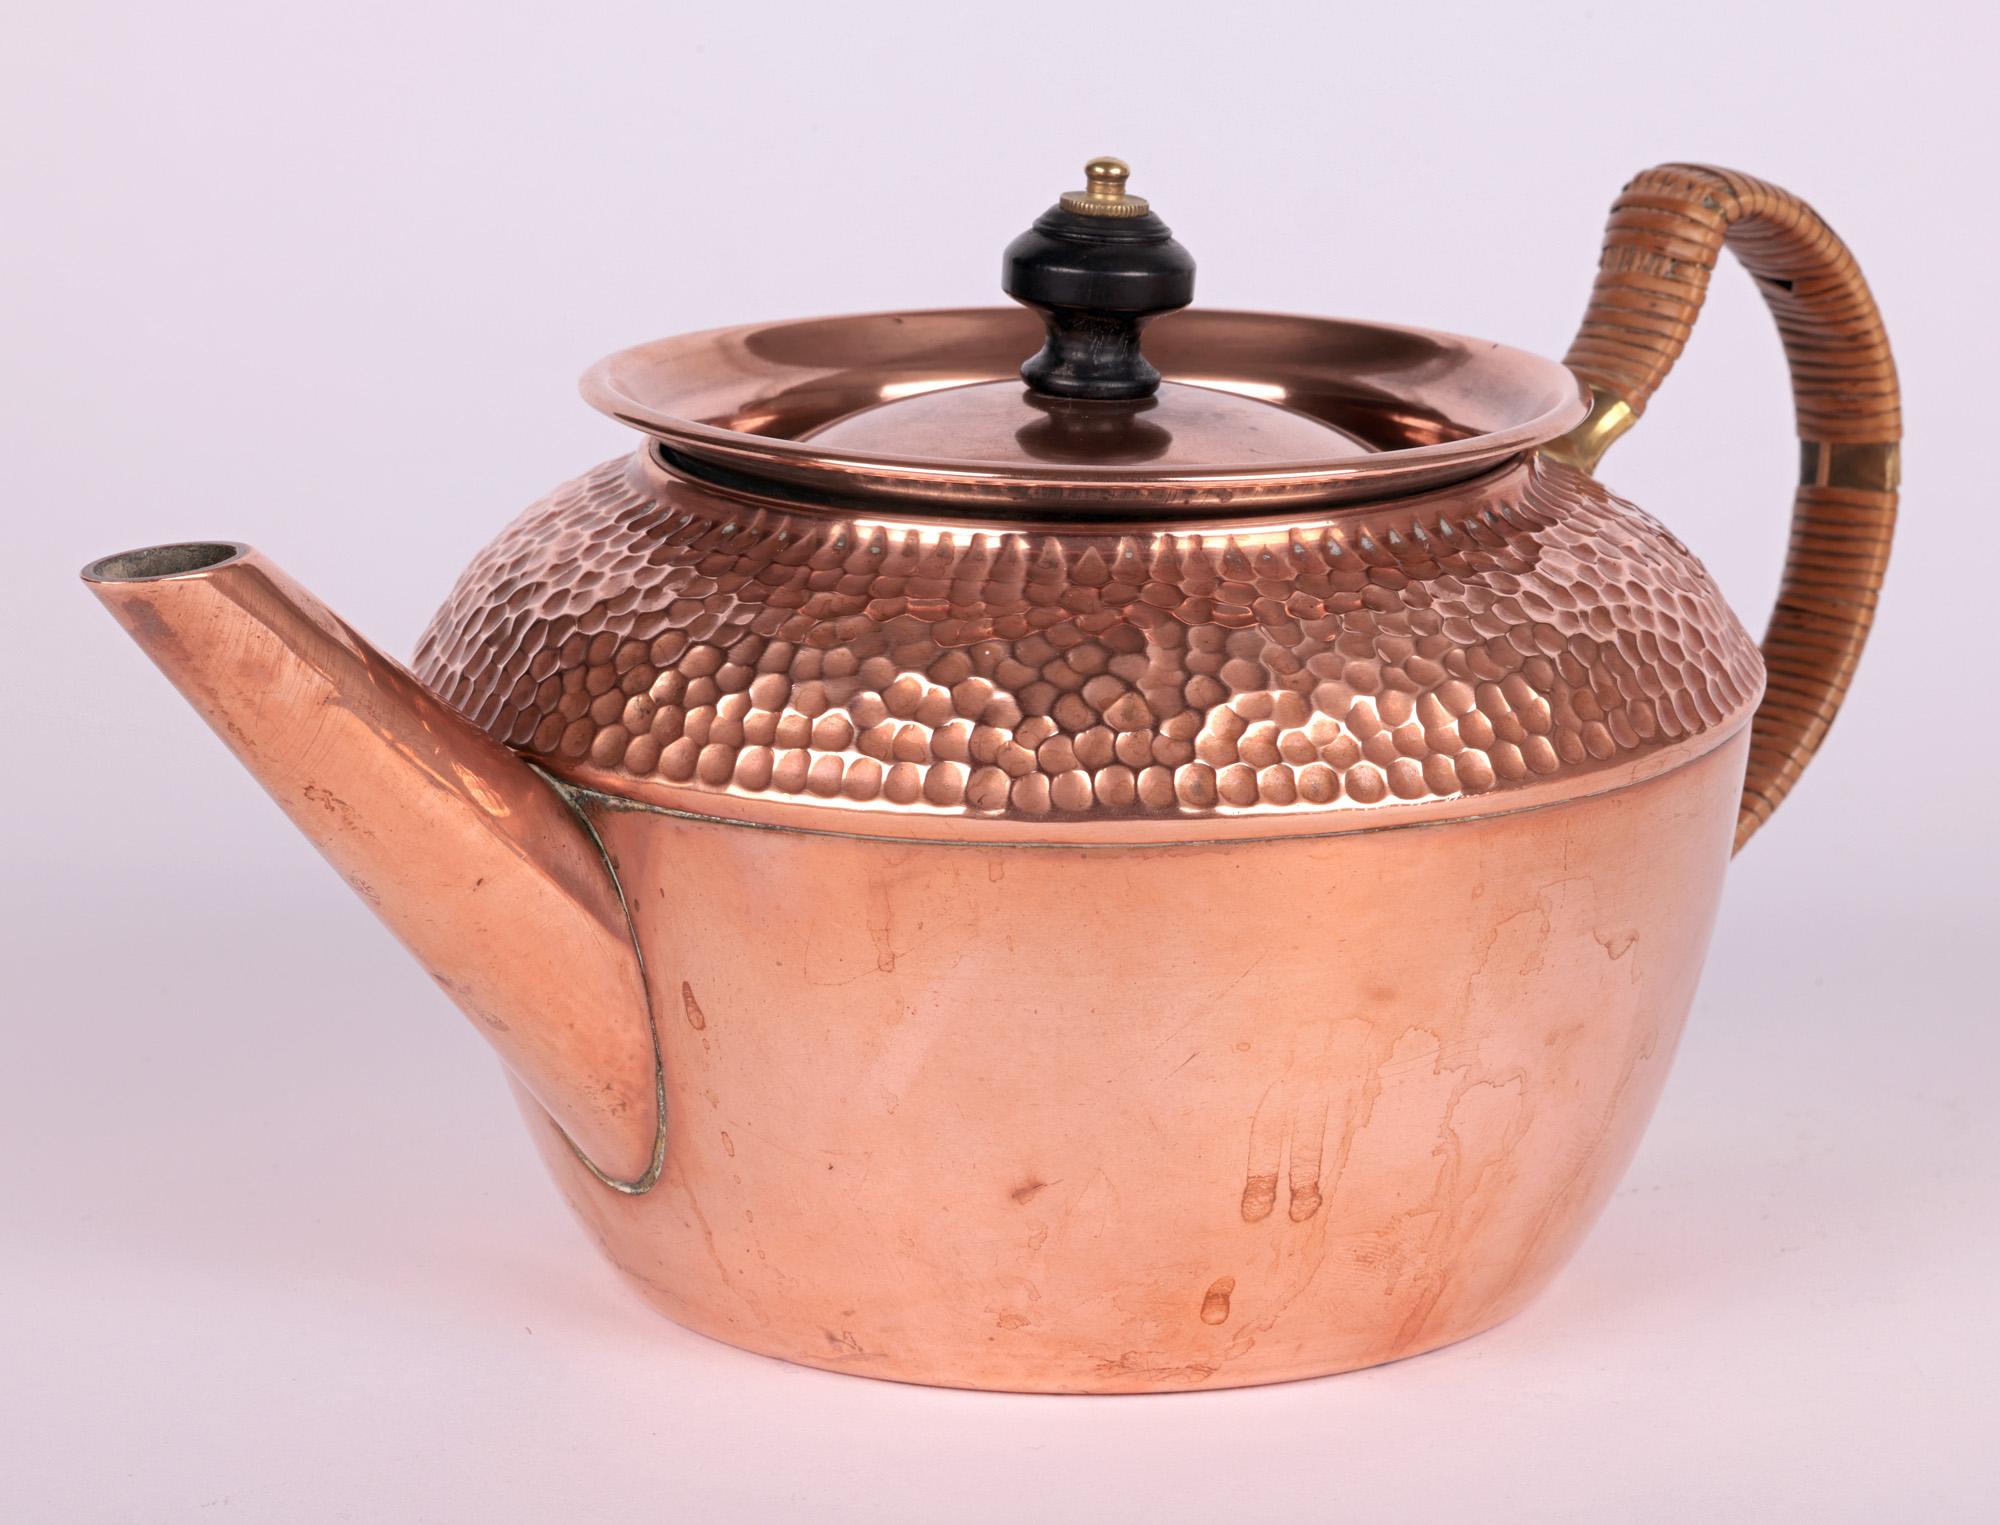 A rare aesthetic movement three piece copper and brass teaset designed by Christopher Dresser for Henry Loveridge & Co in 1881. The set comprises of a teapot, milk jug and sugar bowl each copper bodied with hand planished patterning to the shoulders